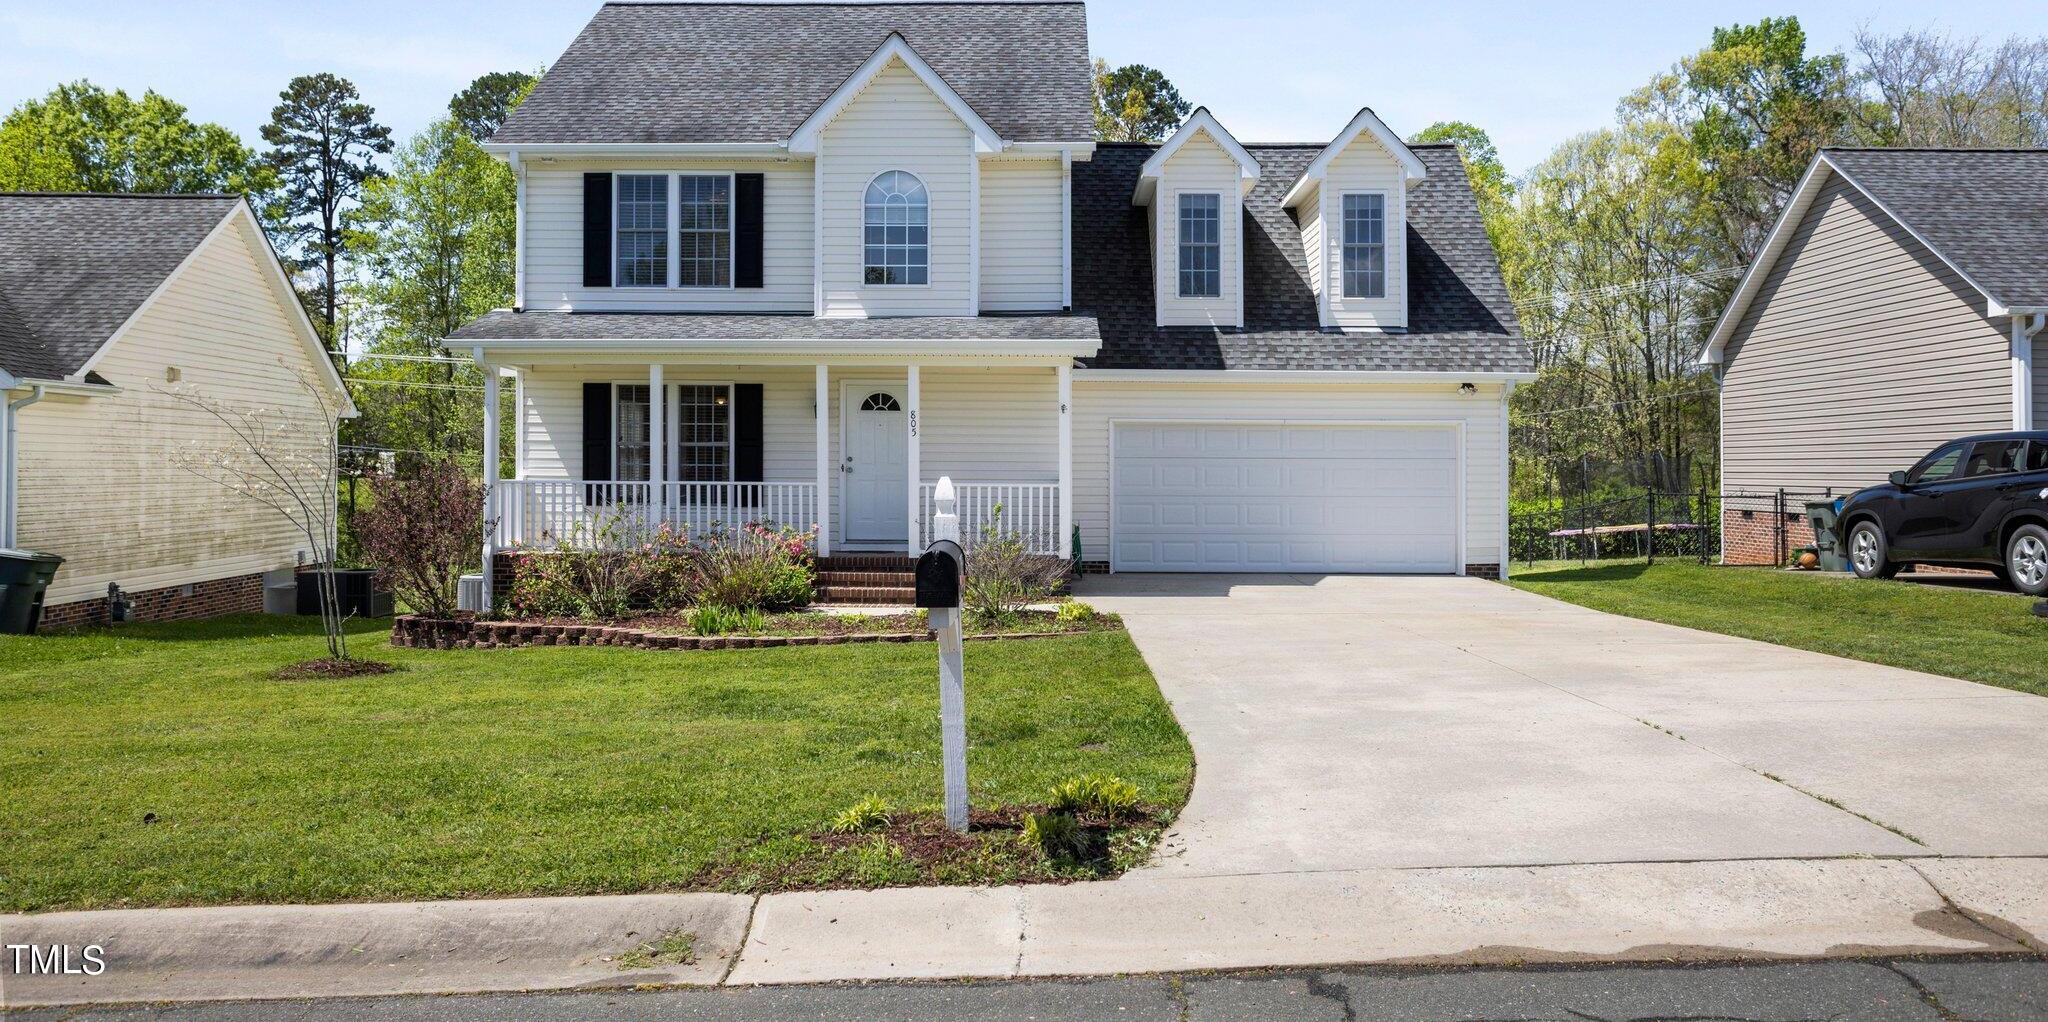 Photo one of 805 Apple St Gibsonville NC 27249 | MLS 10024144